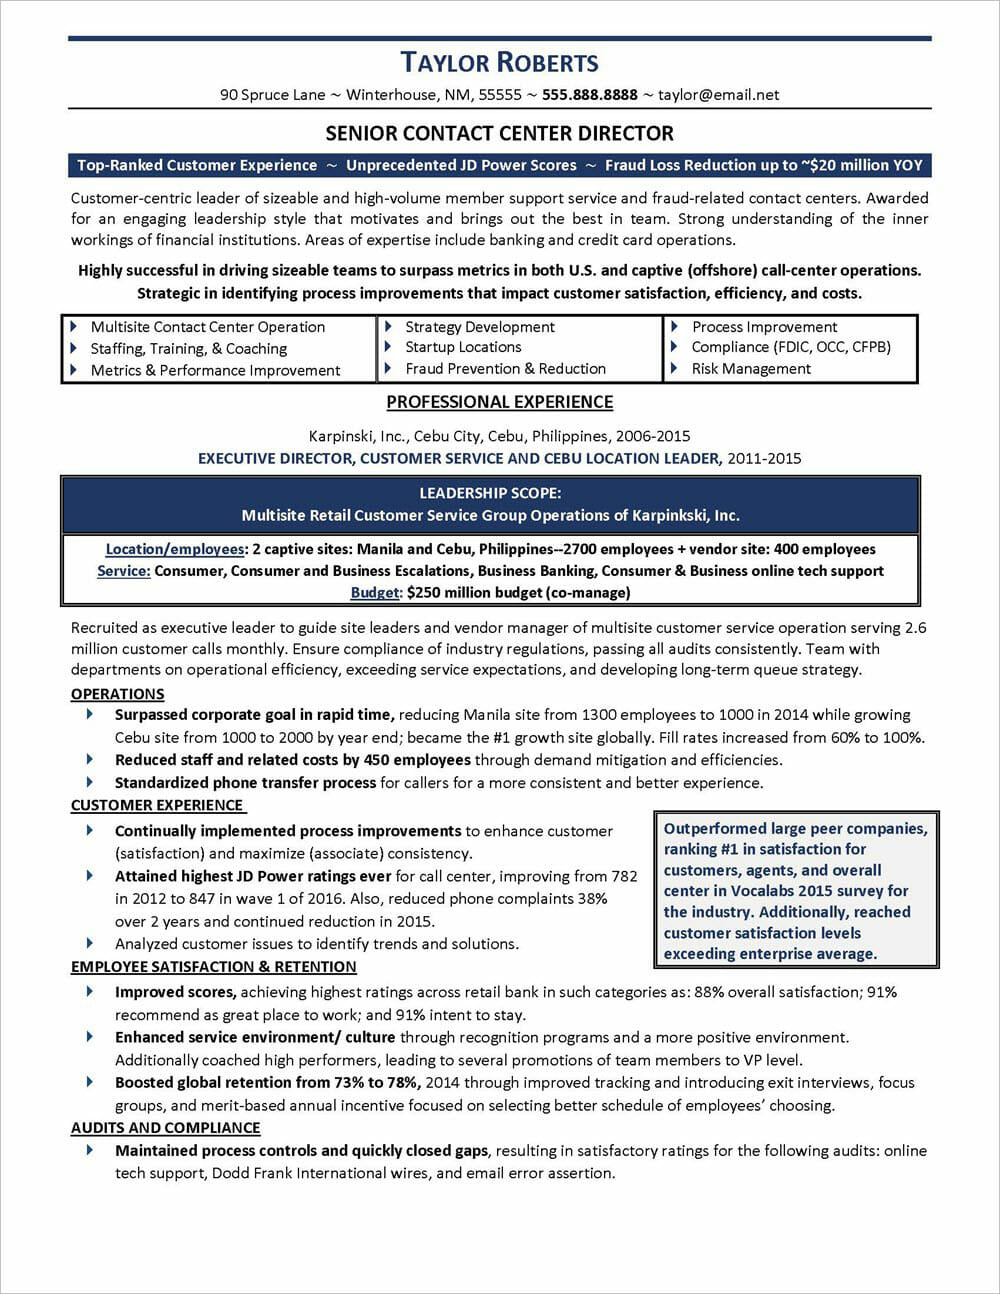 Call Center Resume Example - Distinctive Career Services